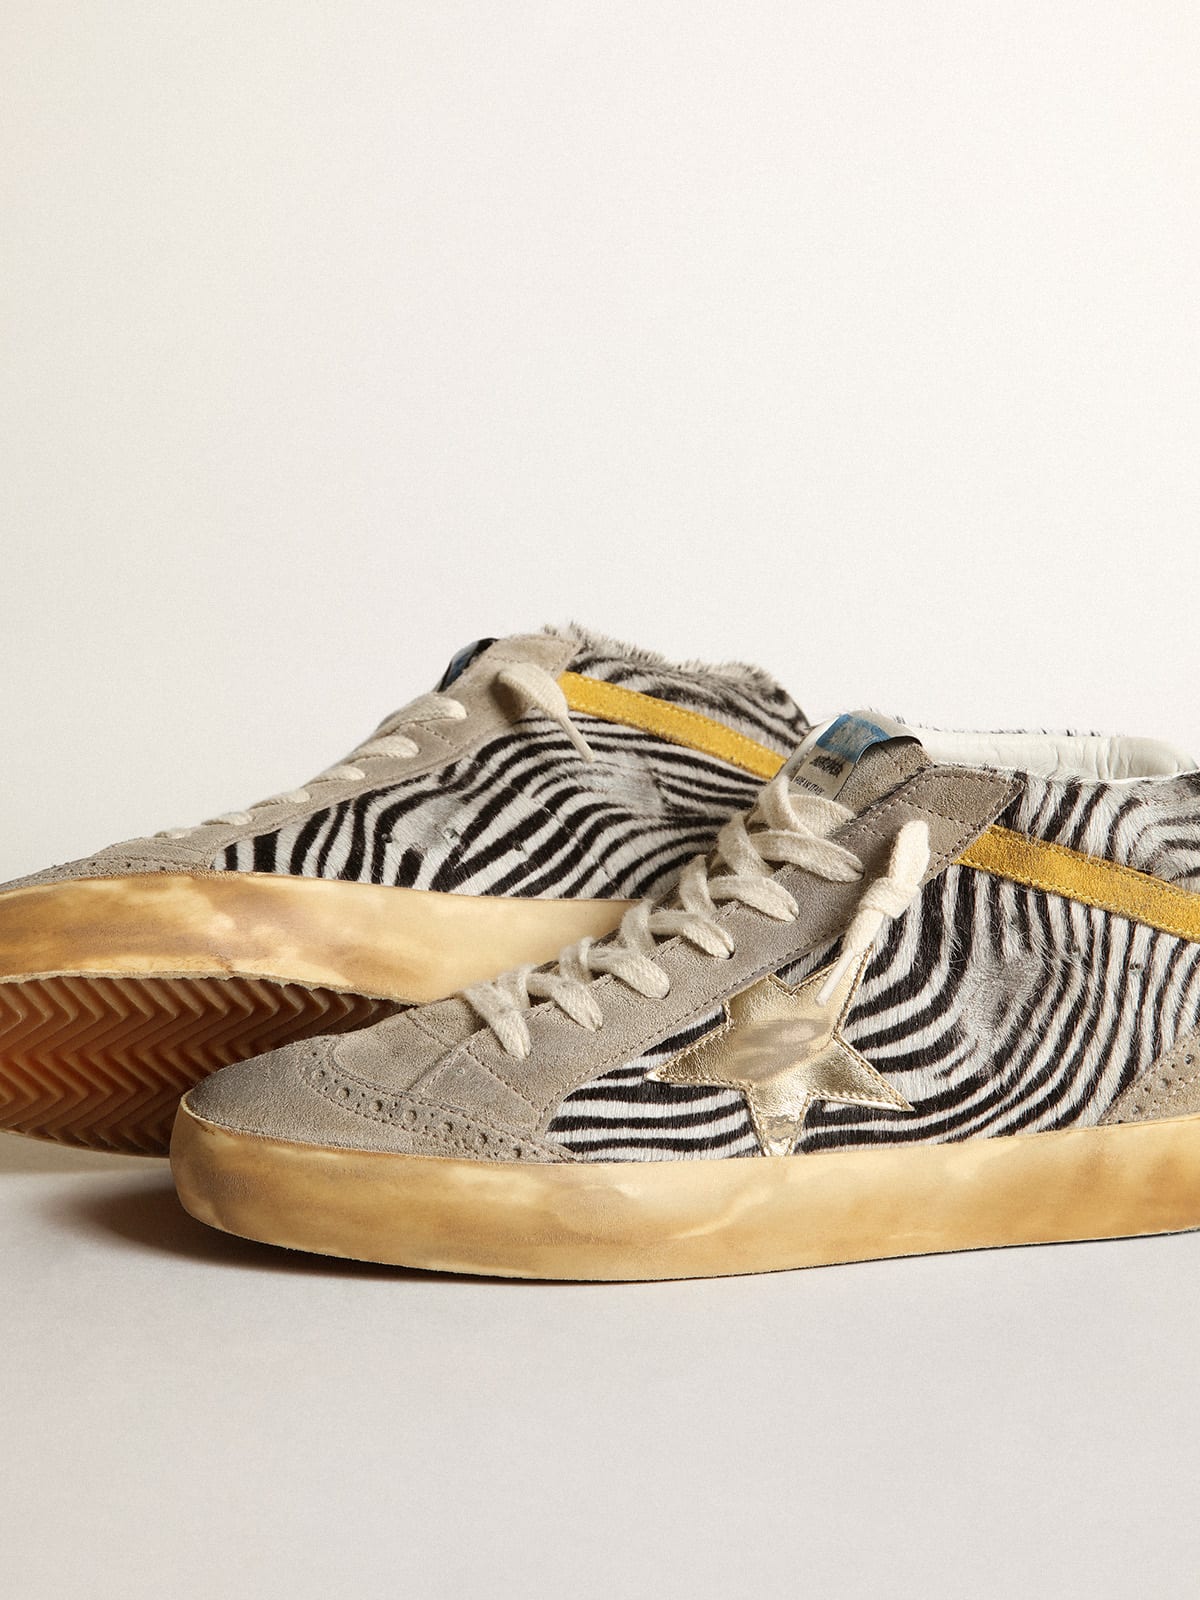 Golden Goose - Mid Star sneakers in zebra-print pony skin with gold metallic leather star and mustard-colored suede flash in 